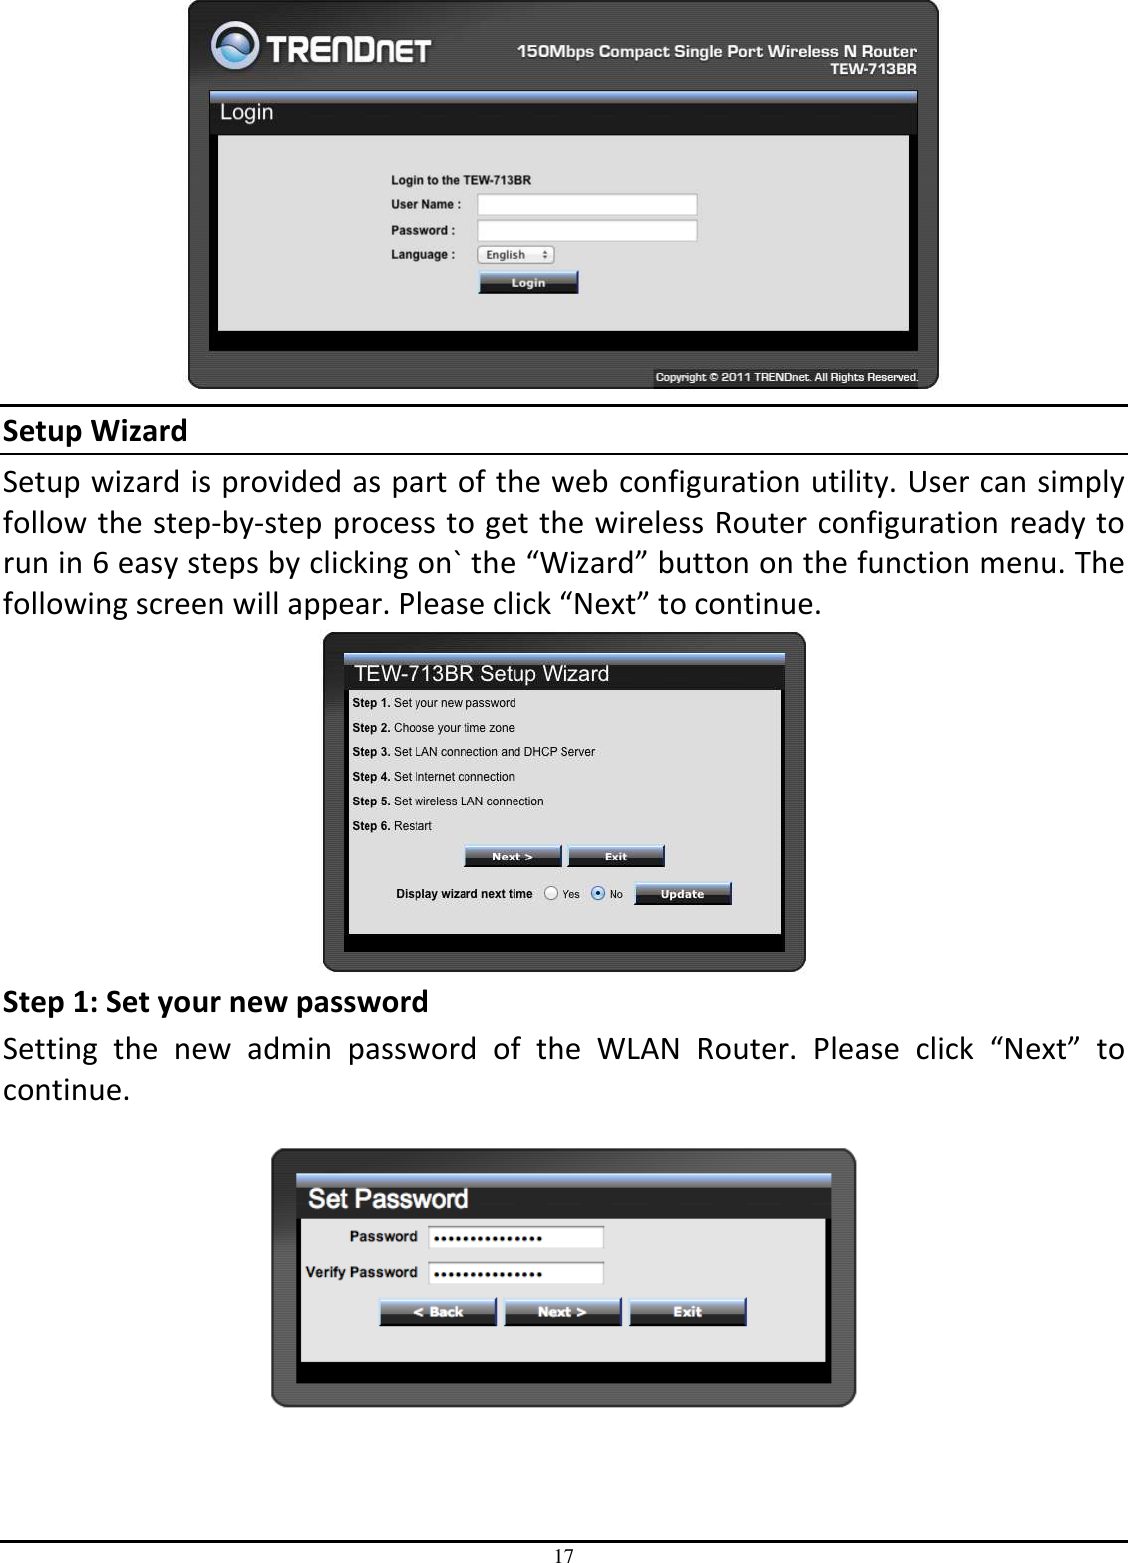 17  Setup Wizard Setup wizard is provided as part of the web configuration utility. User can simply follow the step-by-step process to get the wireless Router configuration ready to run in 6 easy steps by clicking on` the “Wizard” button on the function menu. The following screen will appear. Please click “Next” to continue.  Step 1: Set your new password Setting  the  new  admin  password  of  the  WLAN  Router.  Please  click  “Next”  to continue.      